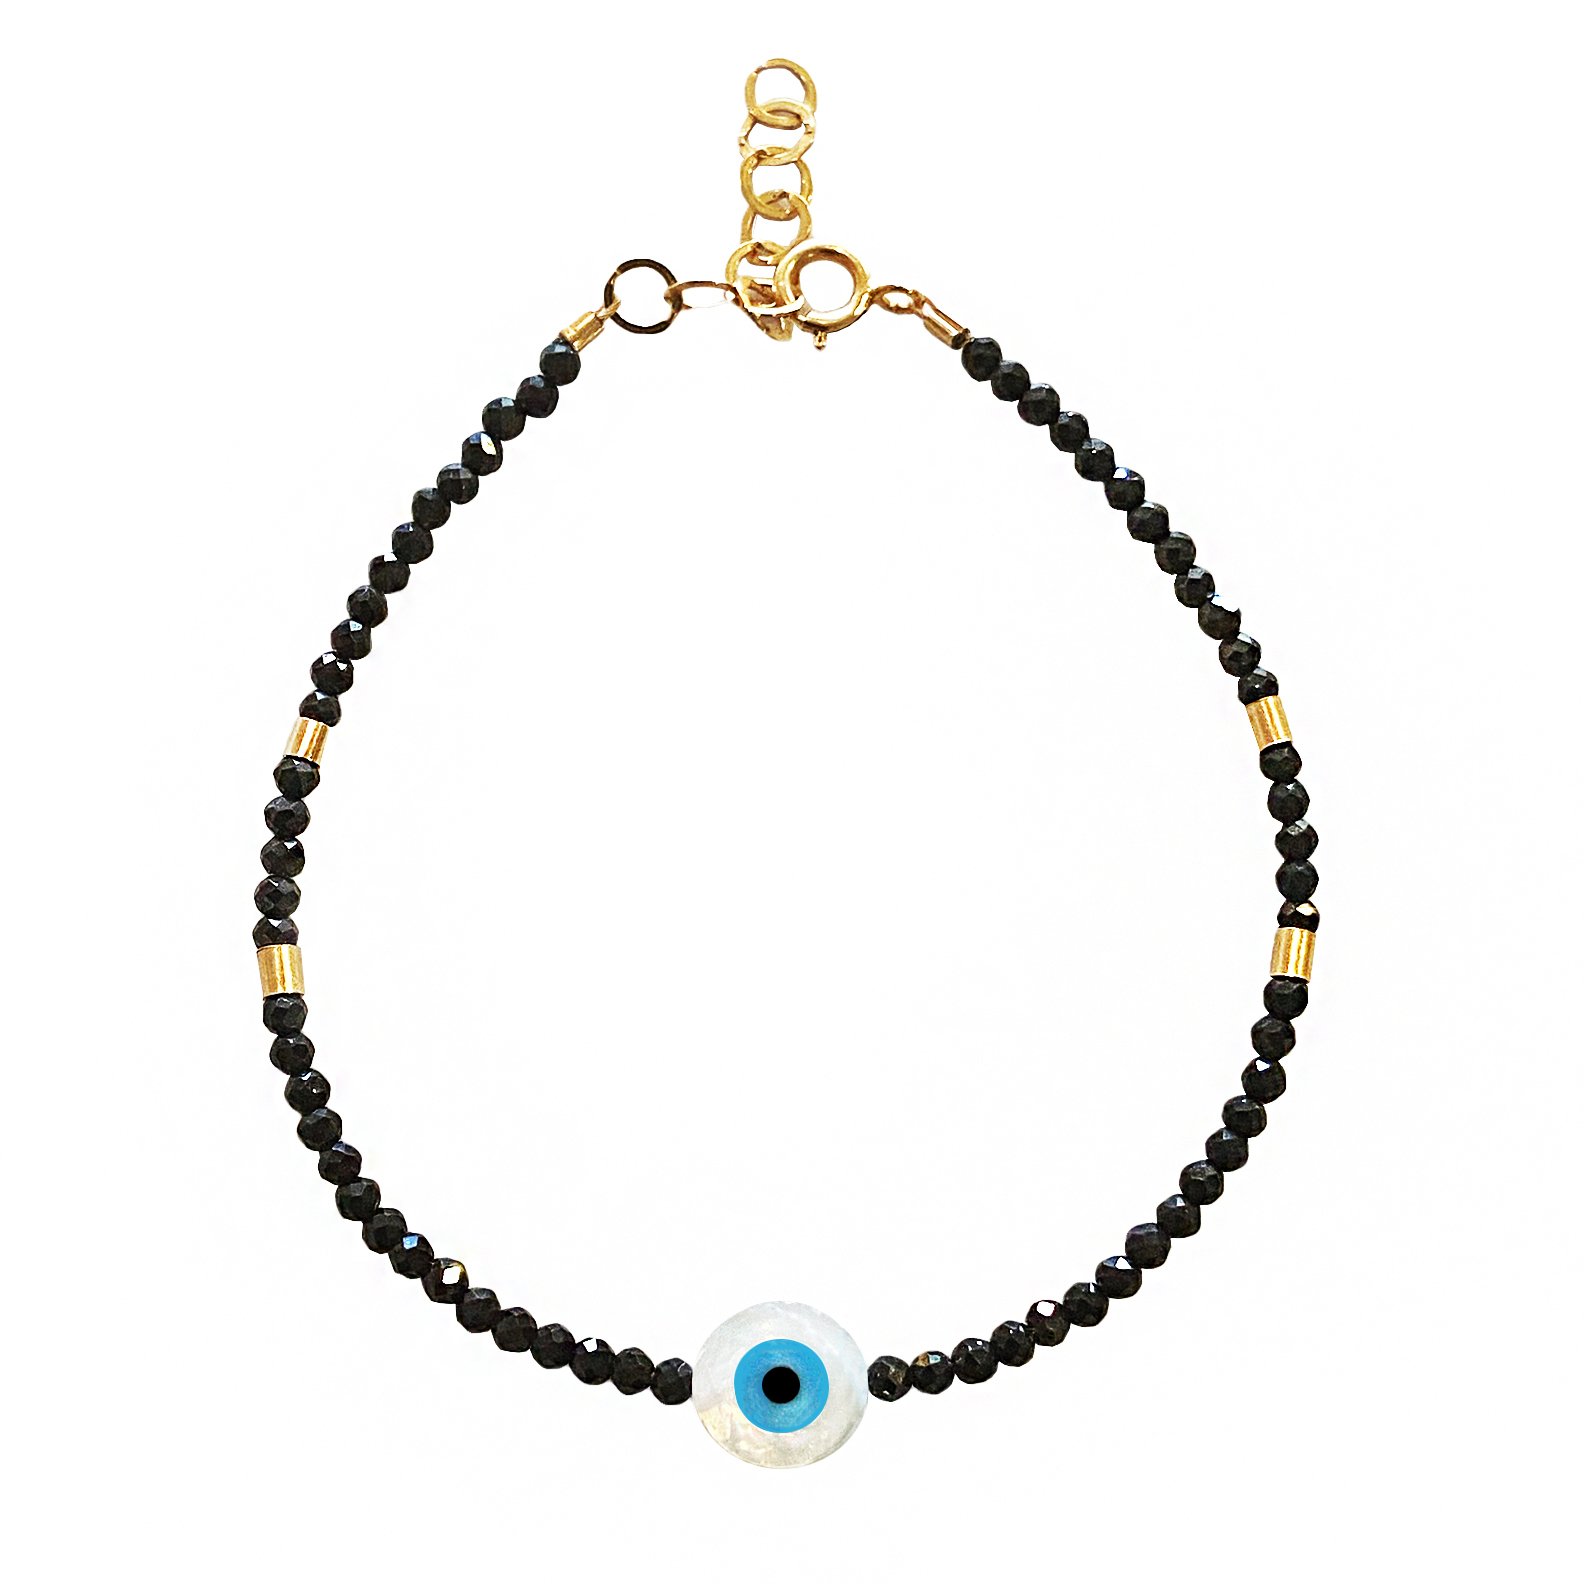 Black Spinel and Handmade Gold Bead Necklace